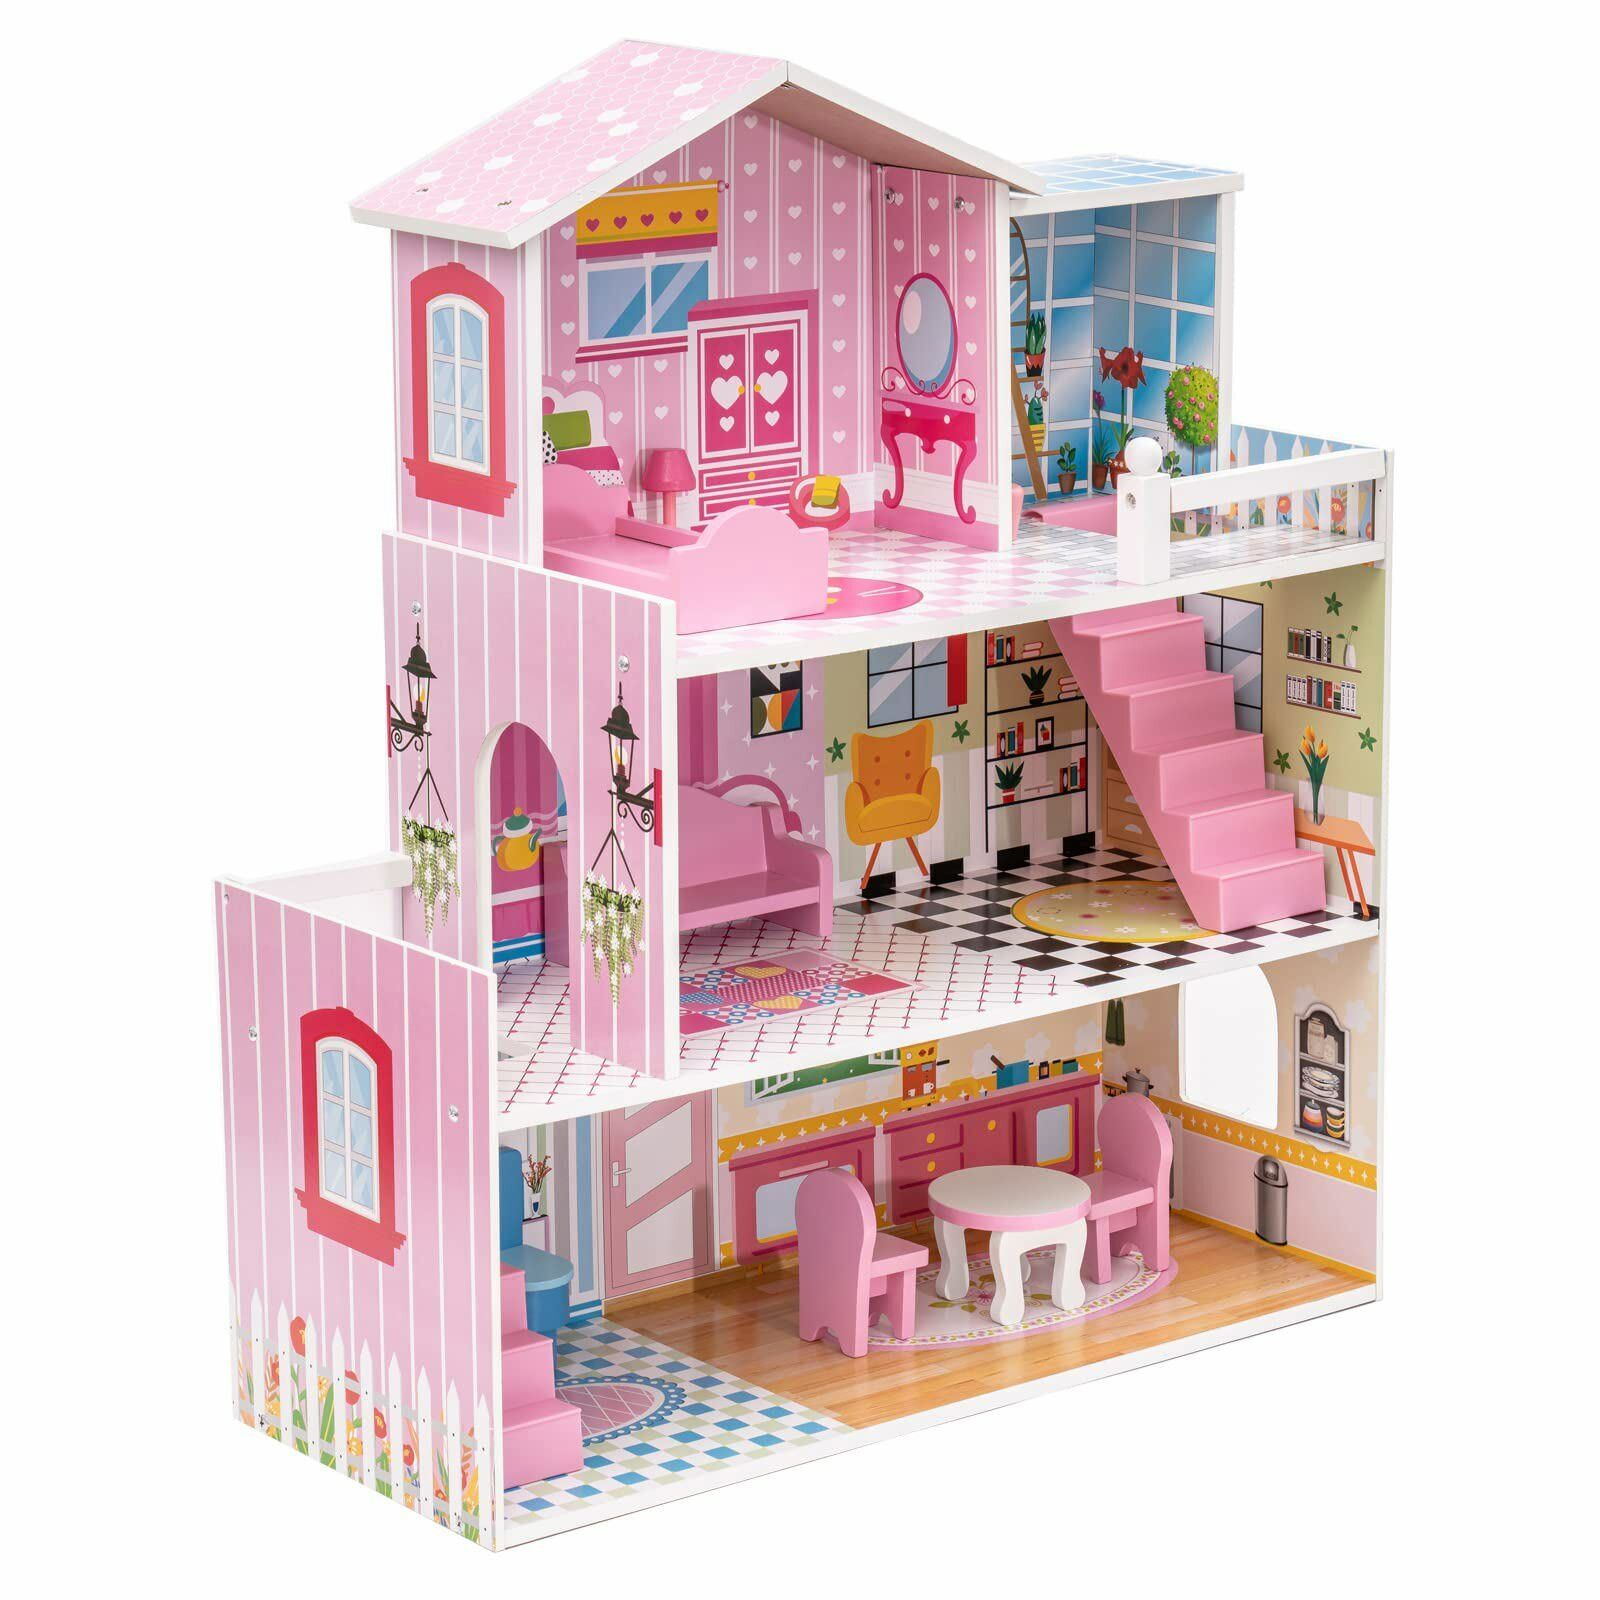 Wooden Dollhouse Wood Doll House w/Furniture Accessories for Girls Playset